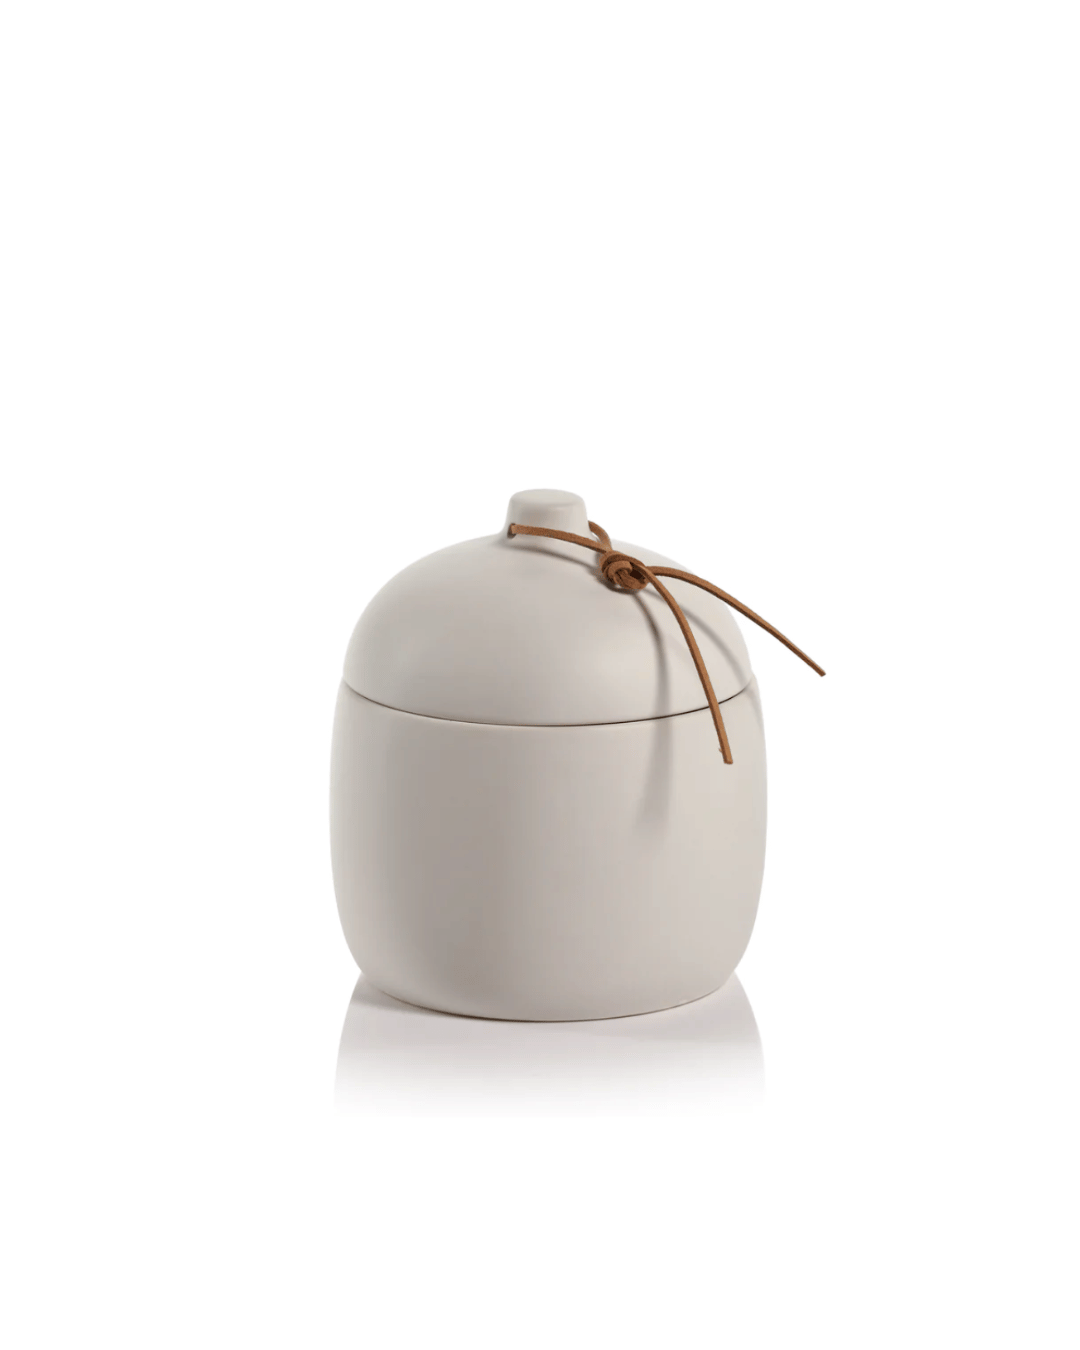 A simple white Zodax ceramic canister with a rounded lid, accented with a thin leather string tied in a bow on a small protruding knob, evokes the rustic aesthetic of a Scottsdale Arizona bungalow. The canister is set against a plain white background.